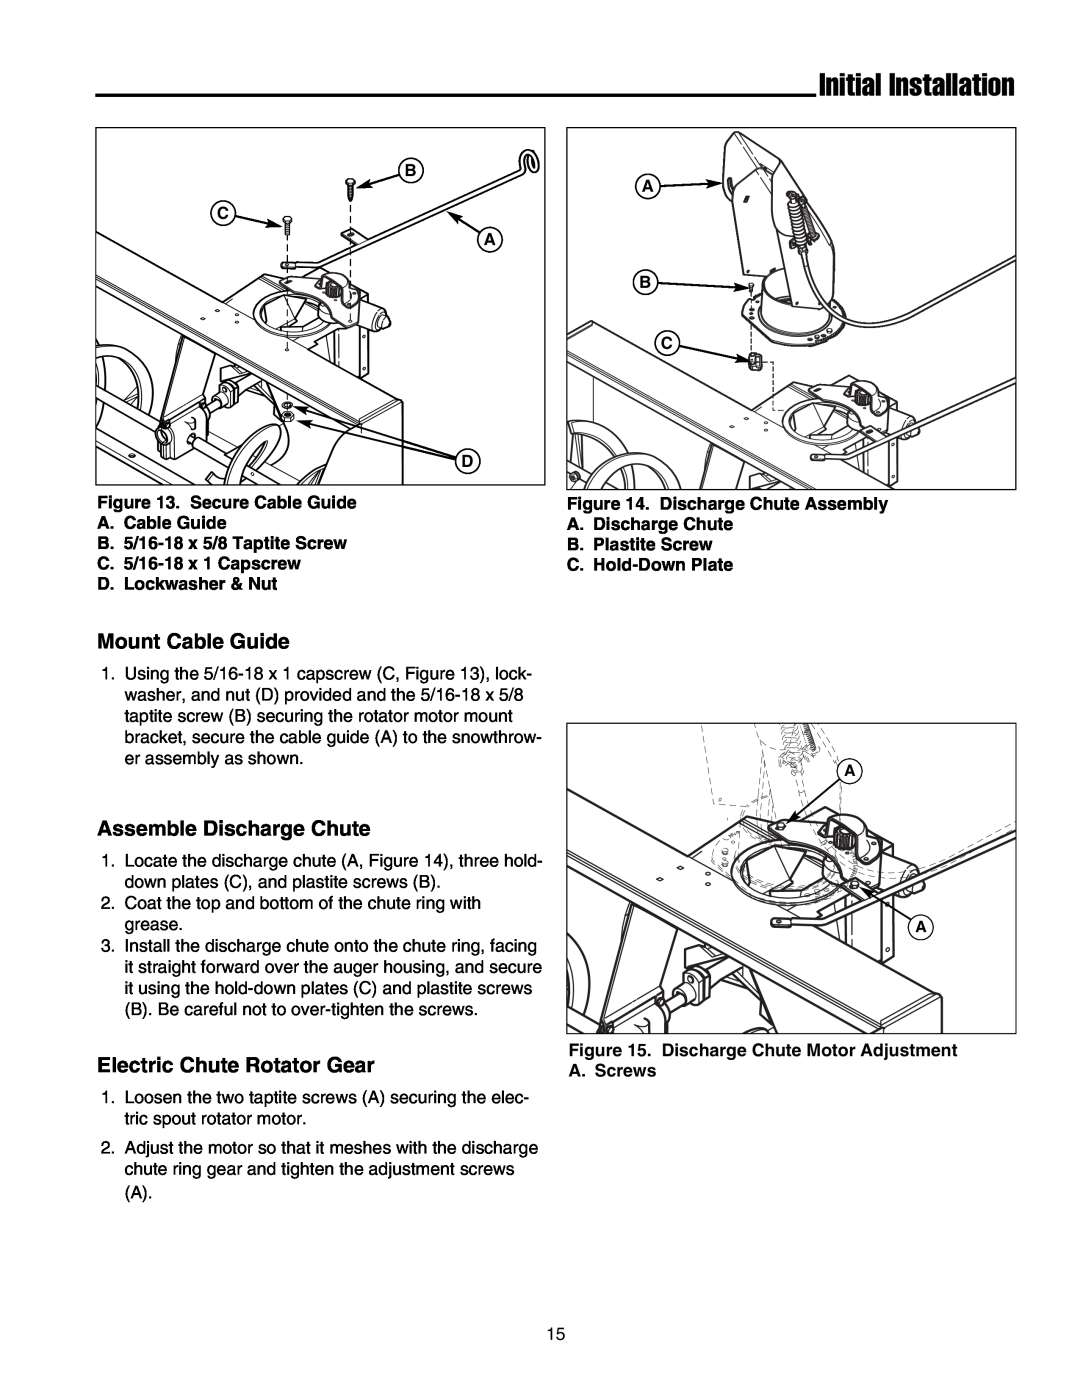 Simplicity 1694404 manual Mount Cable Guide, Assemble Discharge Chute, Electric Chute Rotator Gear, Initial Installation 